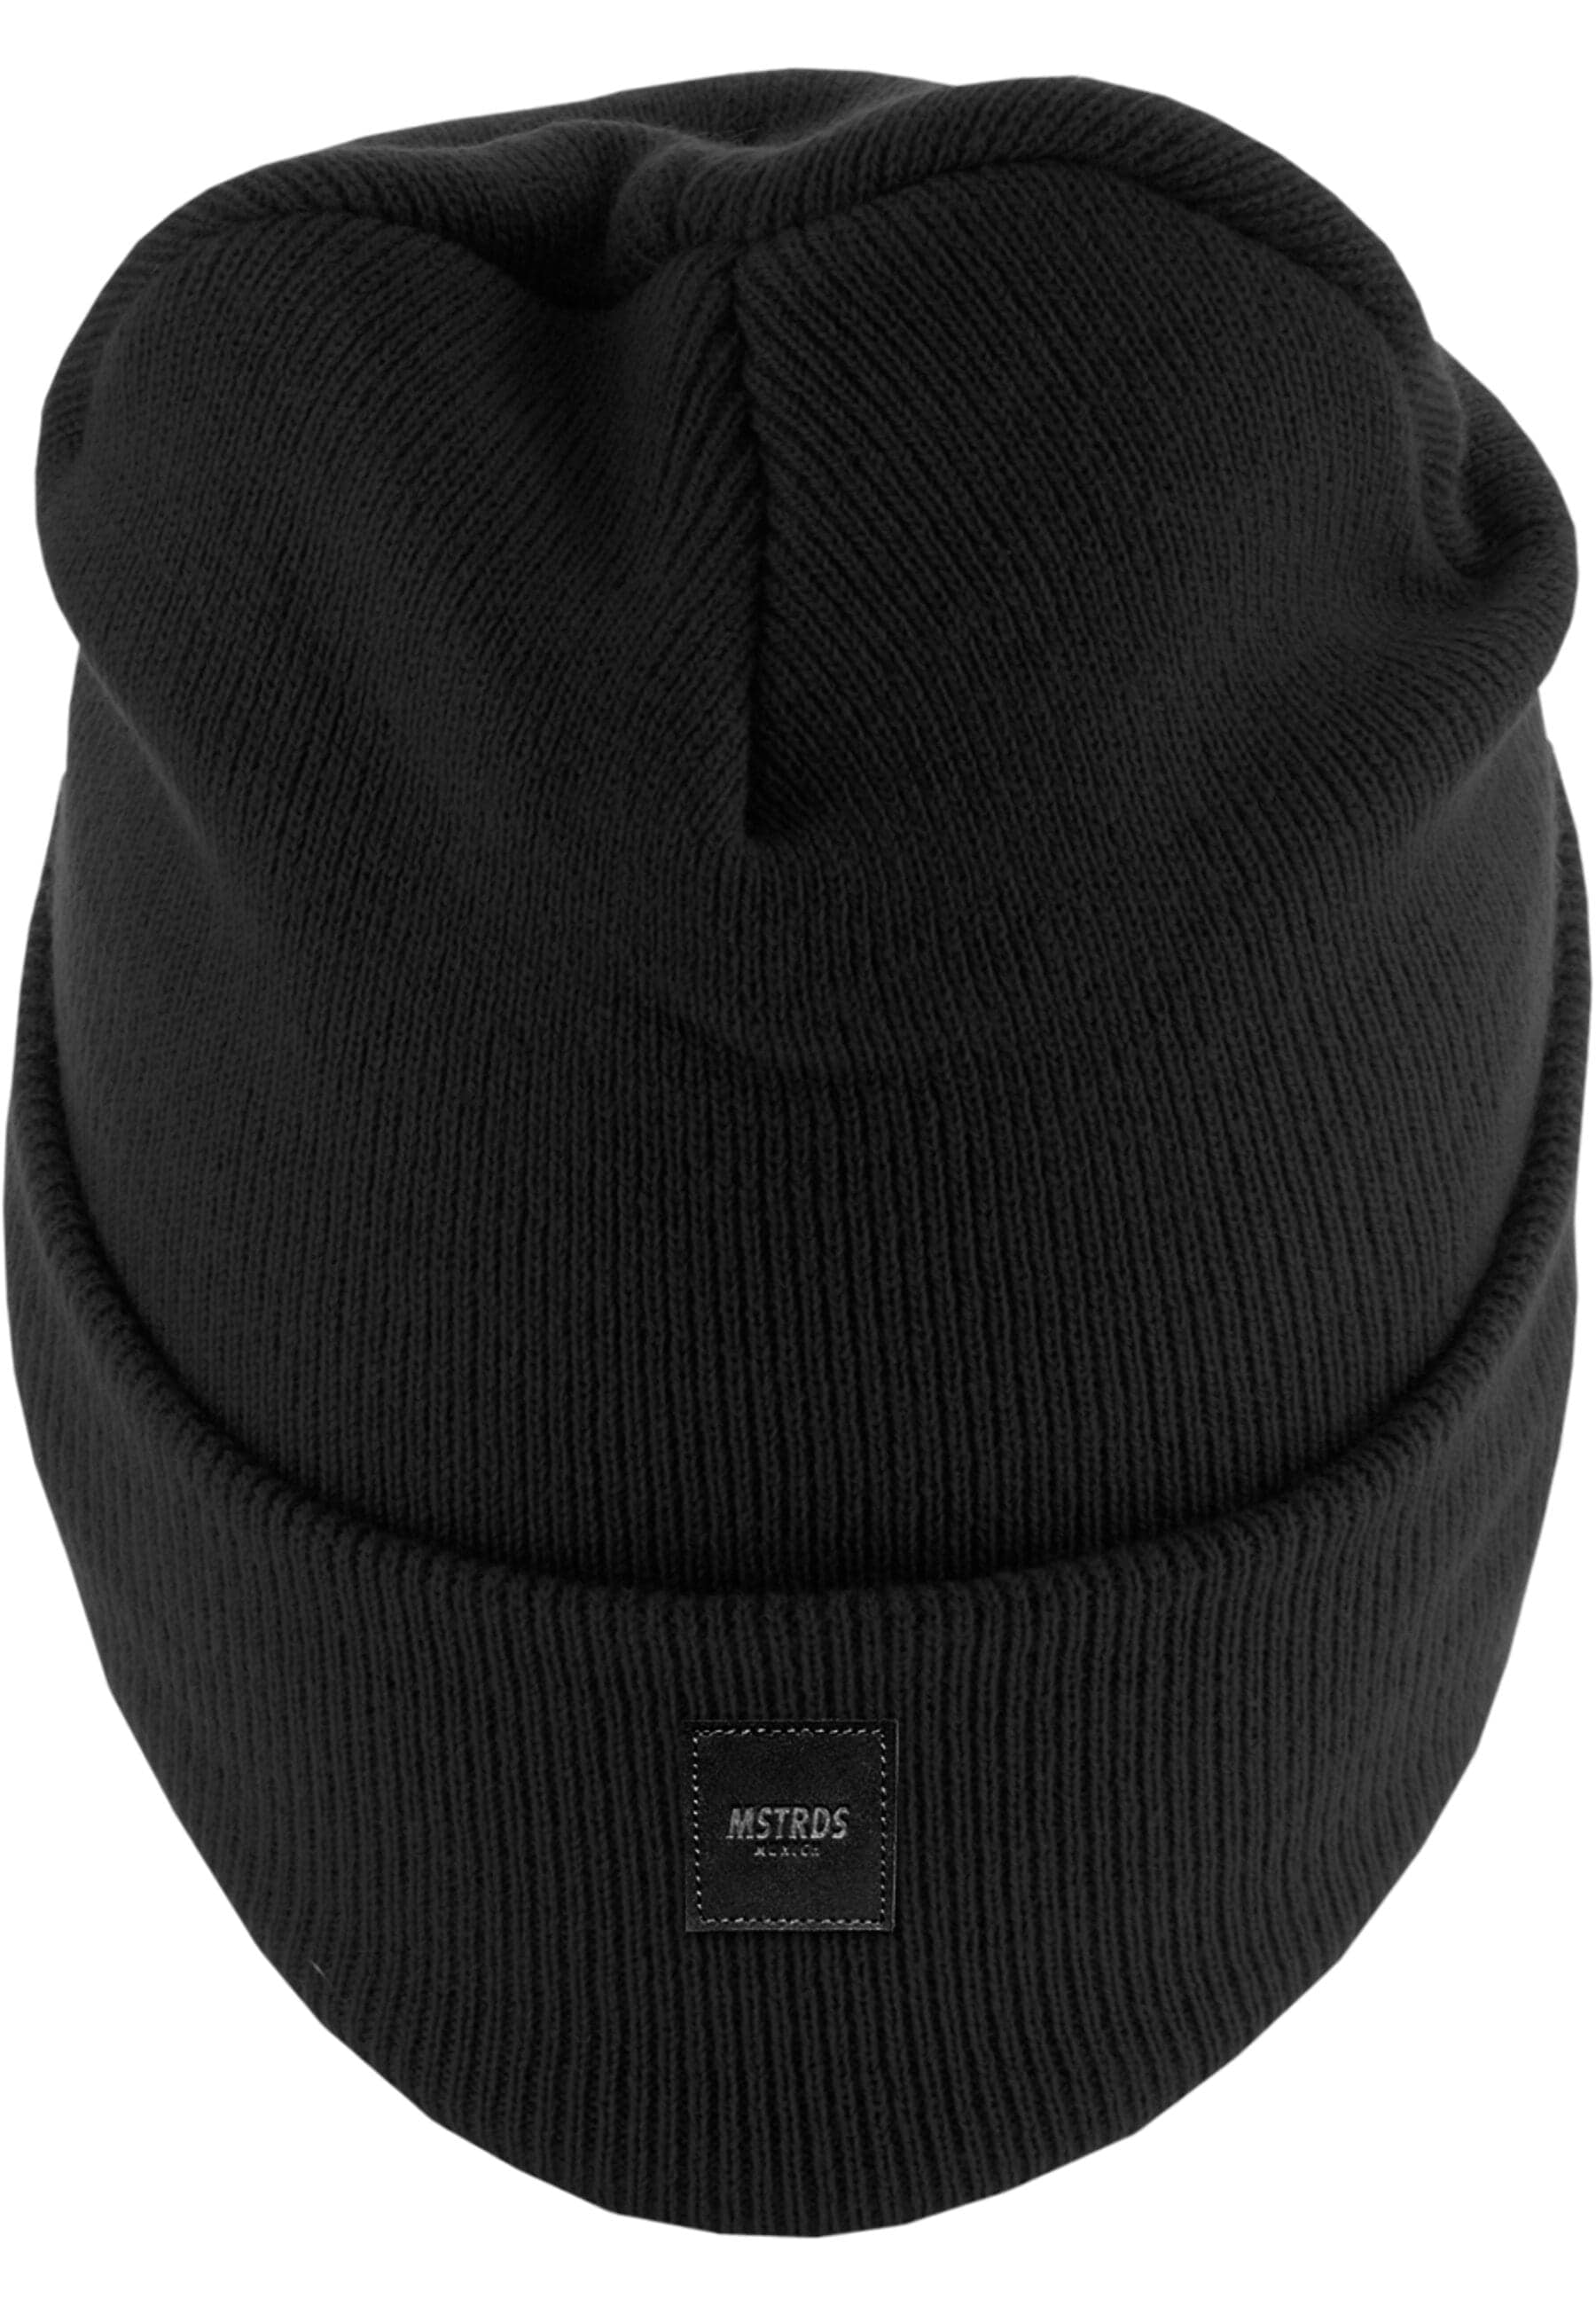 Beanie »MSTRDS Accessoires Letter Cuff Knit Beanie«, (1 St.)